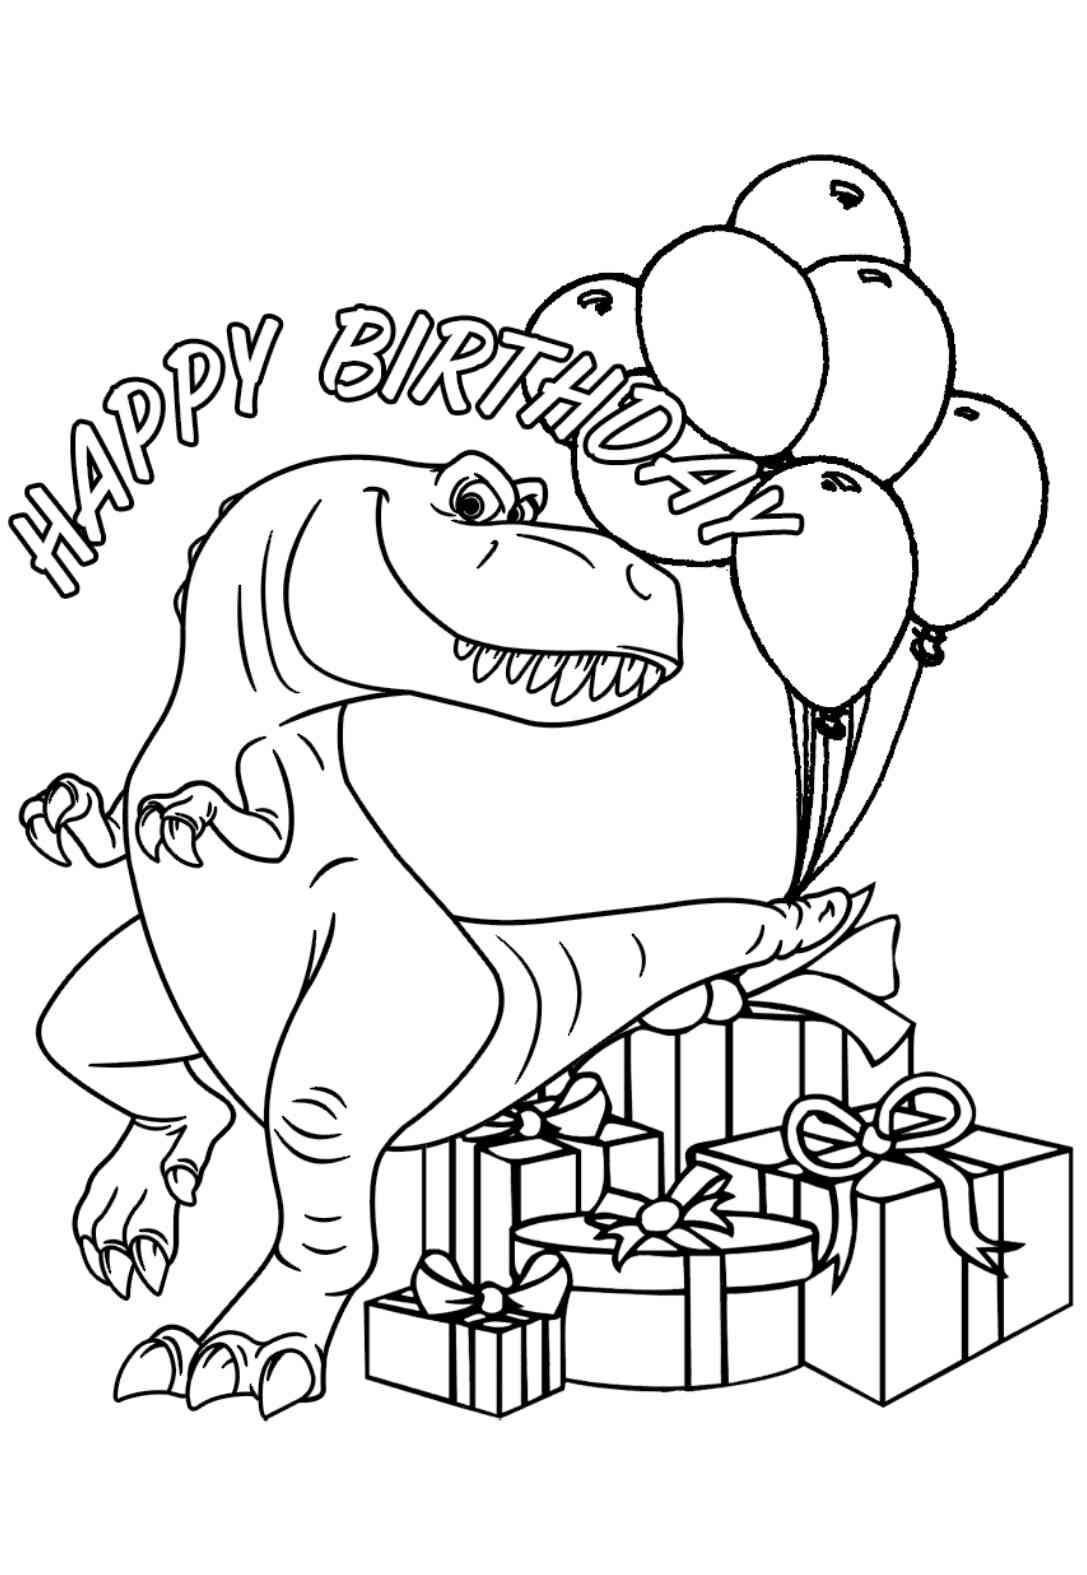 10-gnarly-dinosaur-birthday-coloring-pages-cards-free